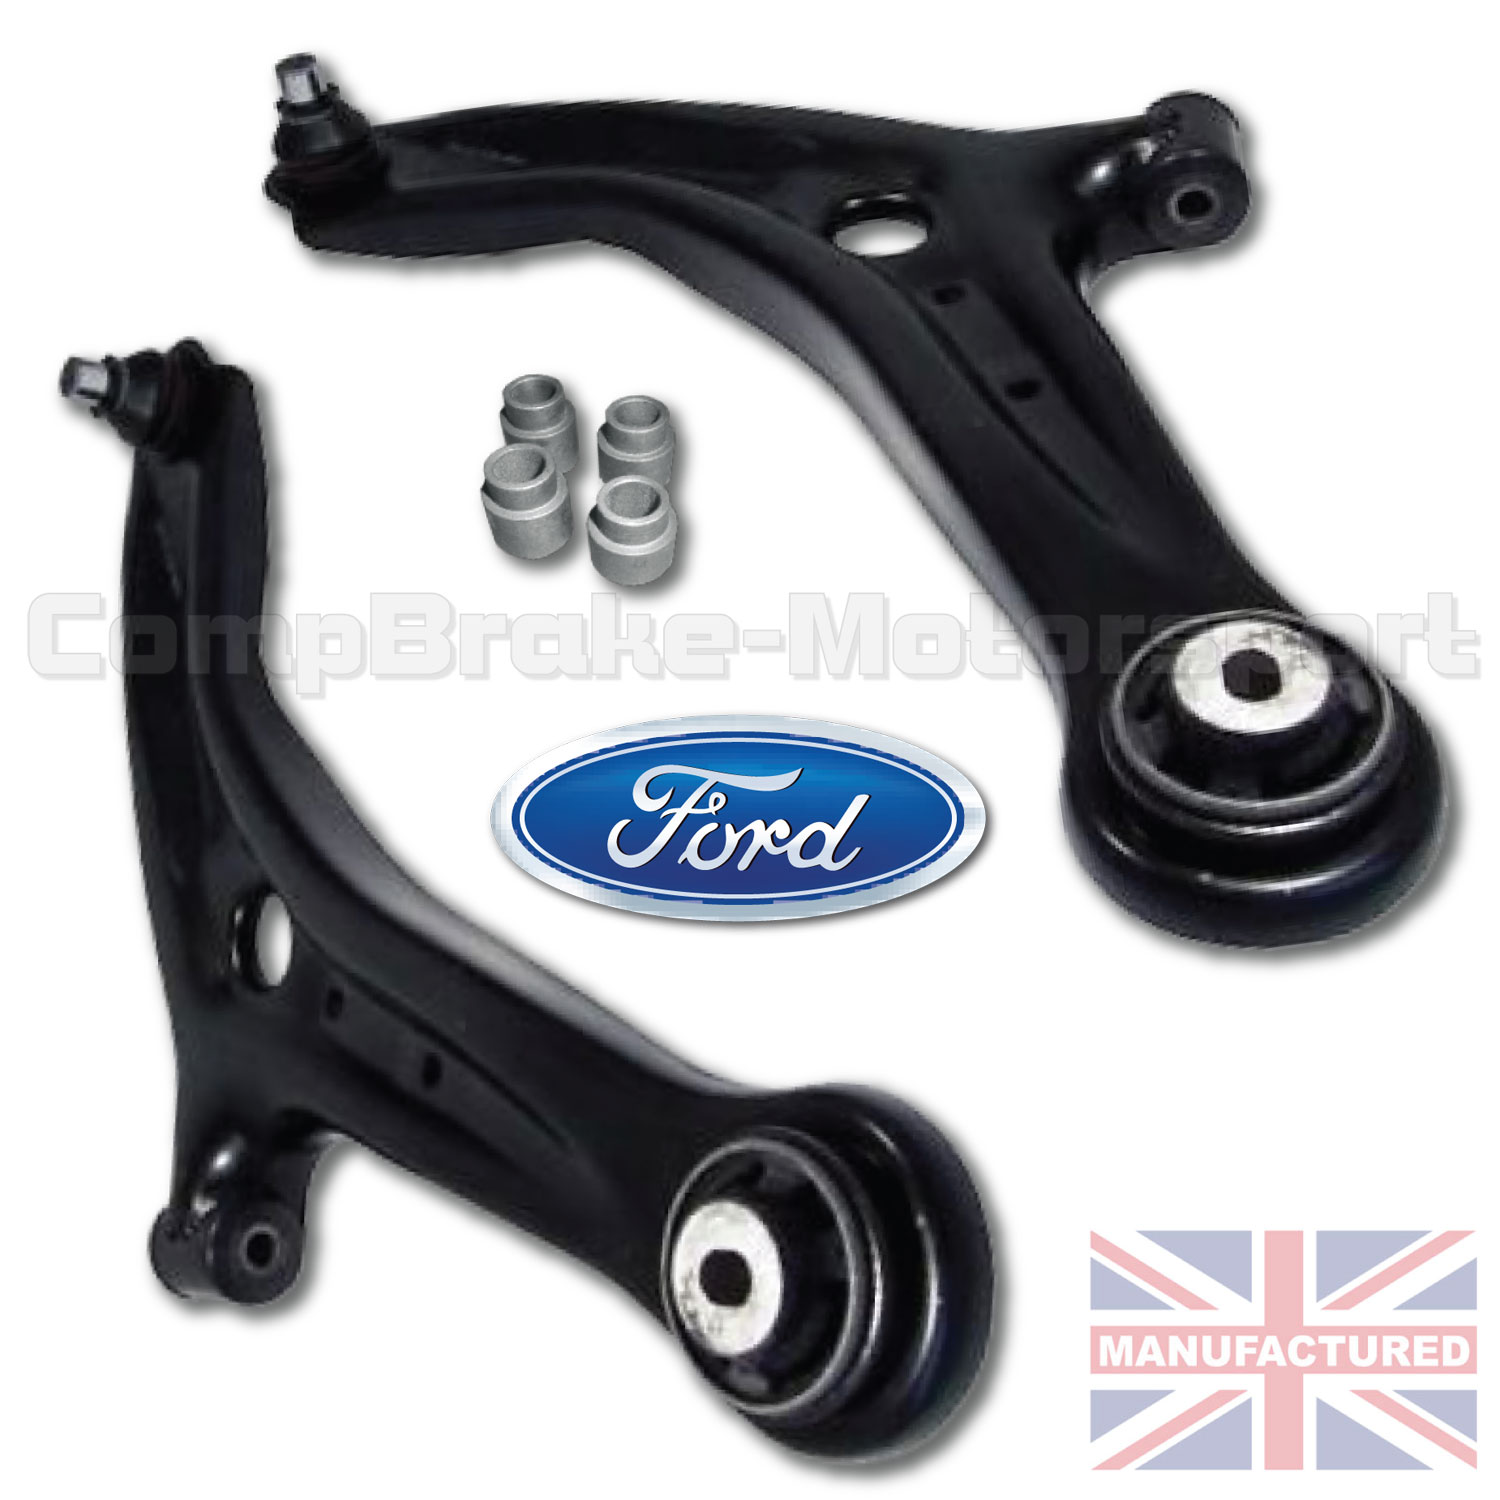 Pour Ford Fiesta MK 4 96-02 deux Front Lower Wishbone Arms Power Steering LH RH 